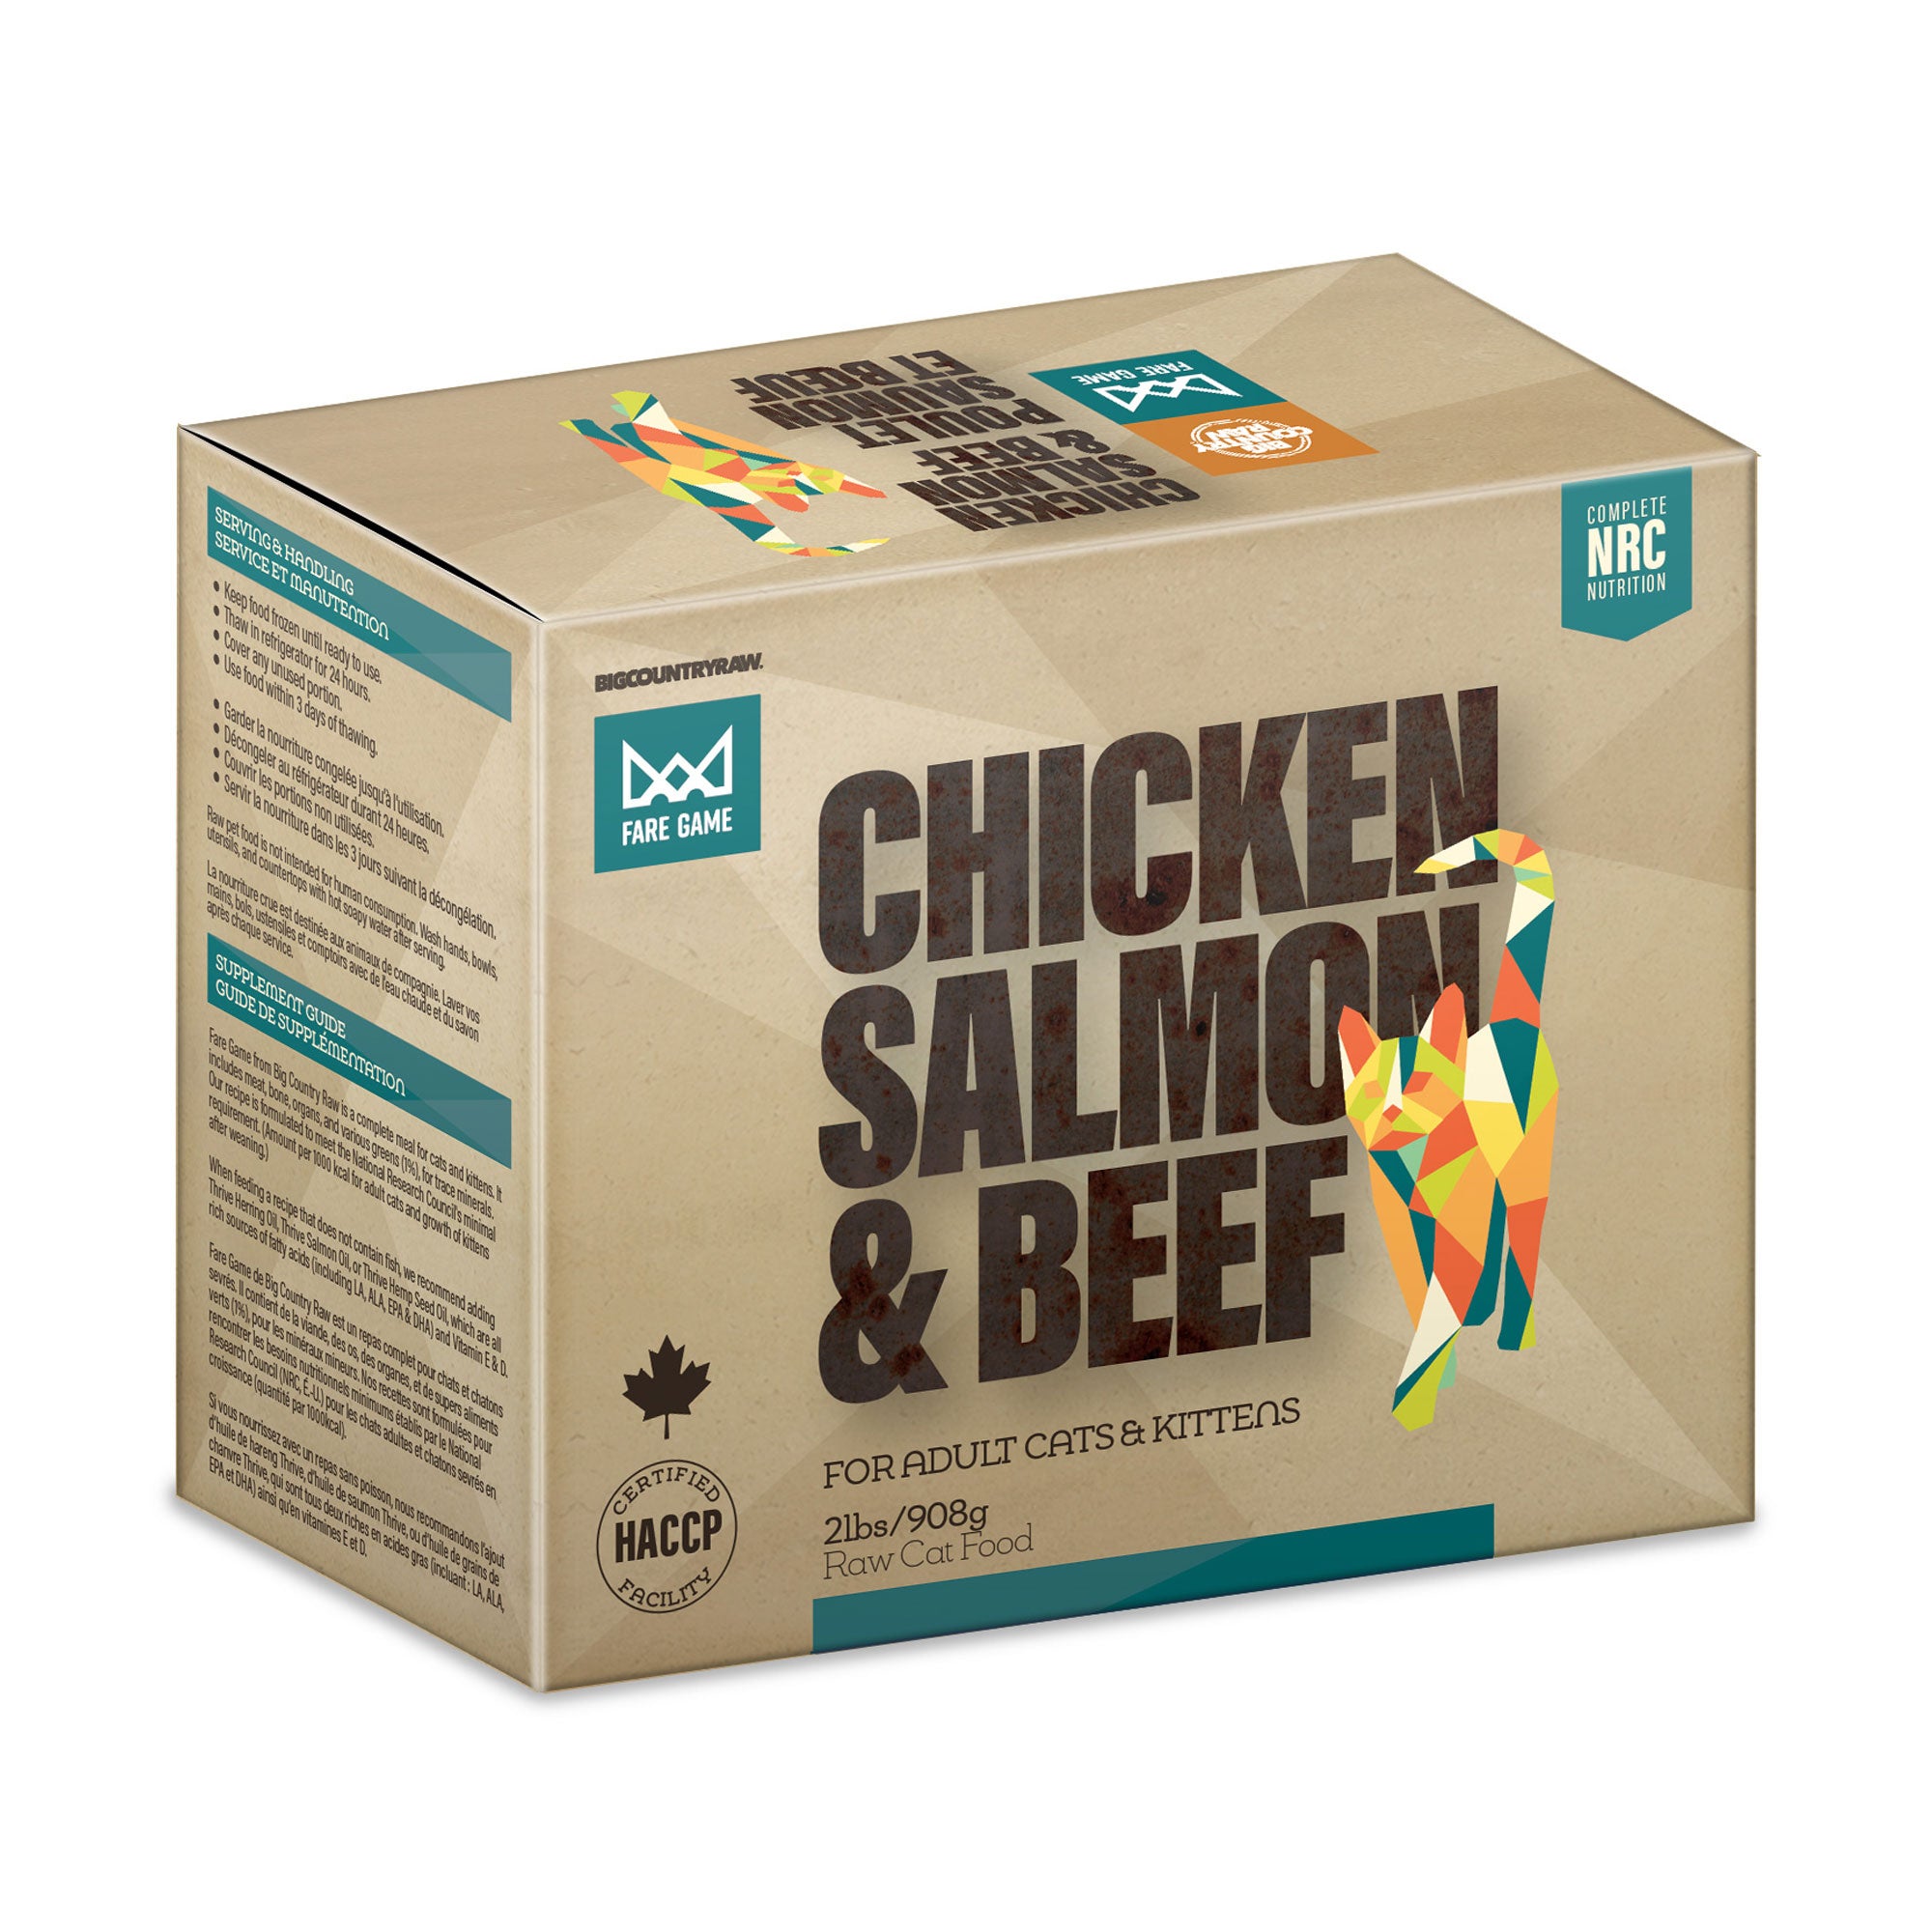 Fare Game – Chicken and Salmon with Beef – 2lb